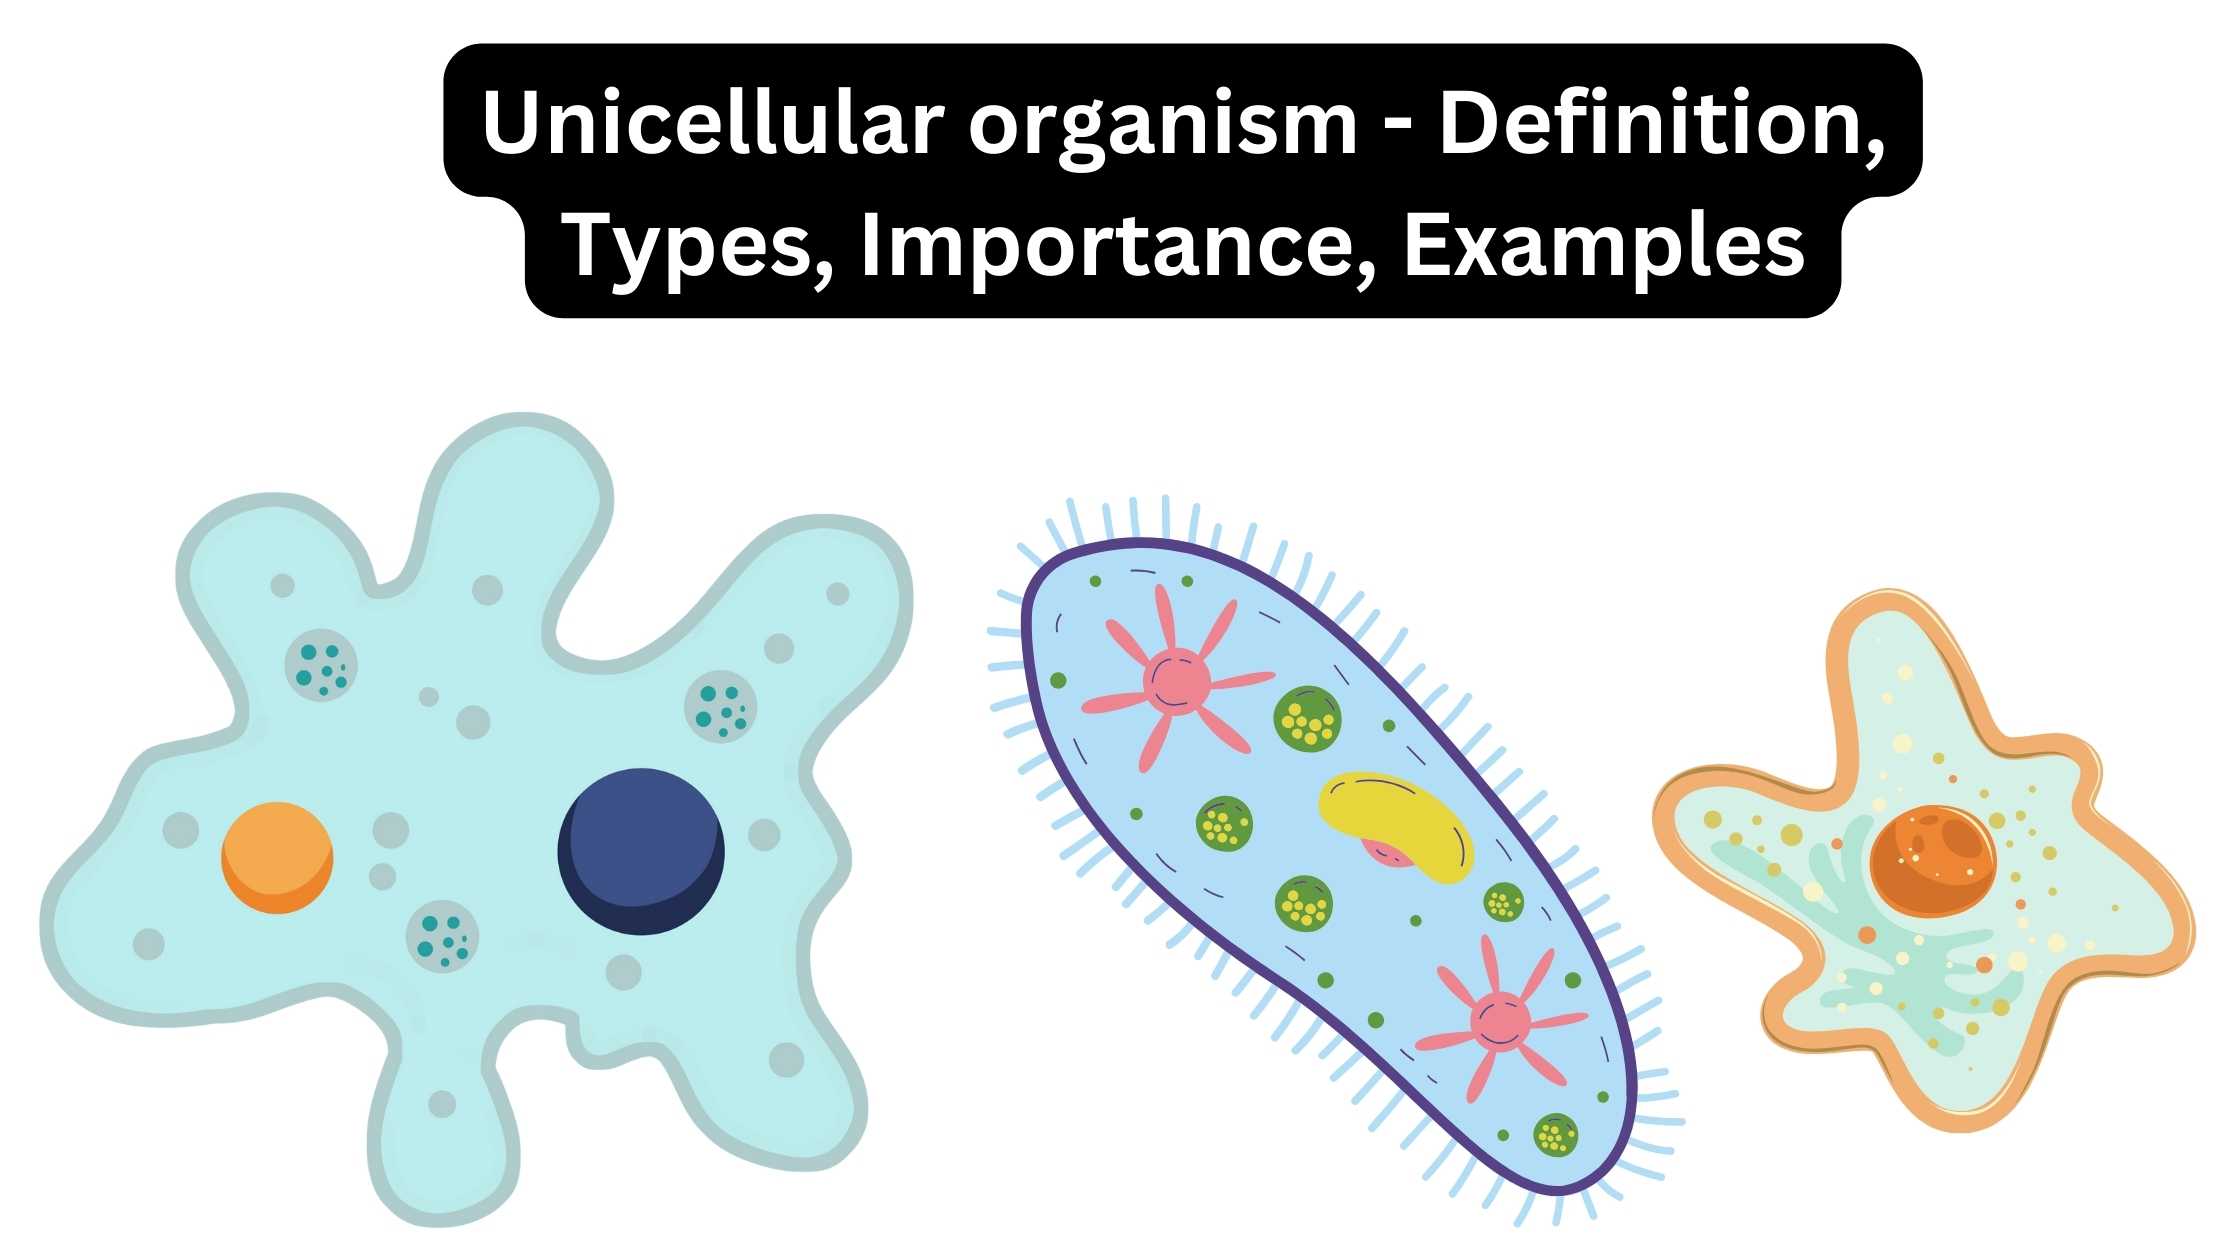 Unicellular organism - Definition, Types, Importance, Examples